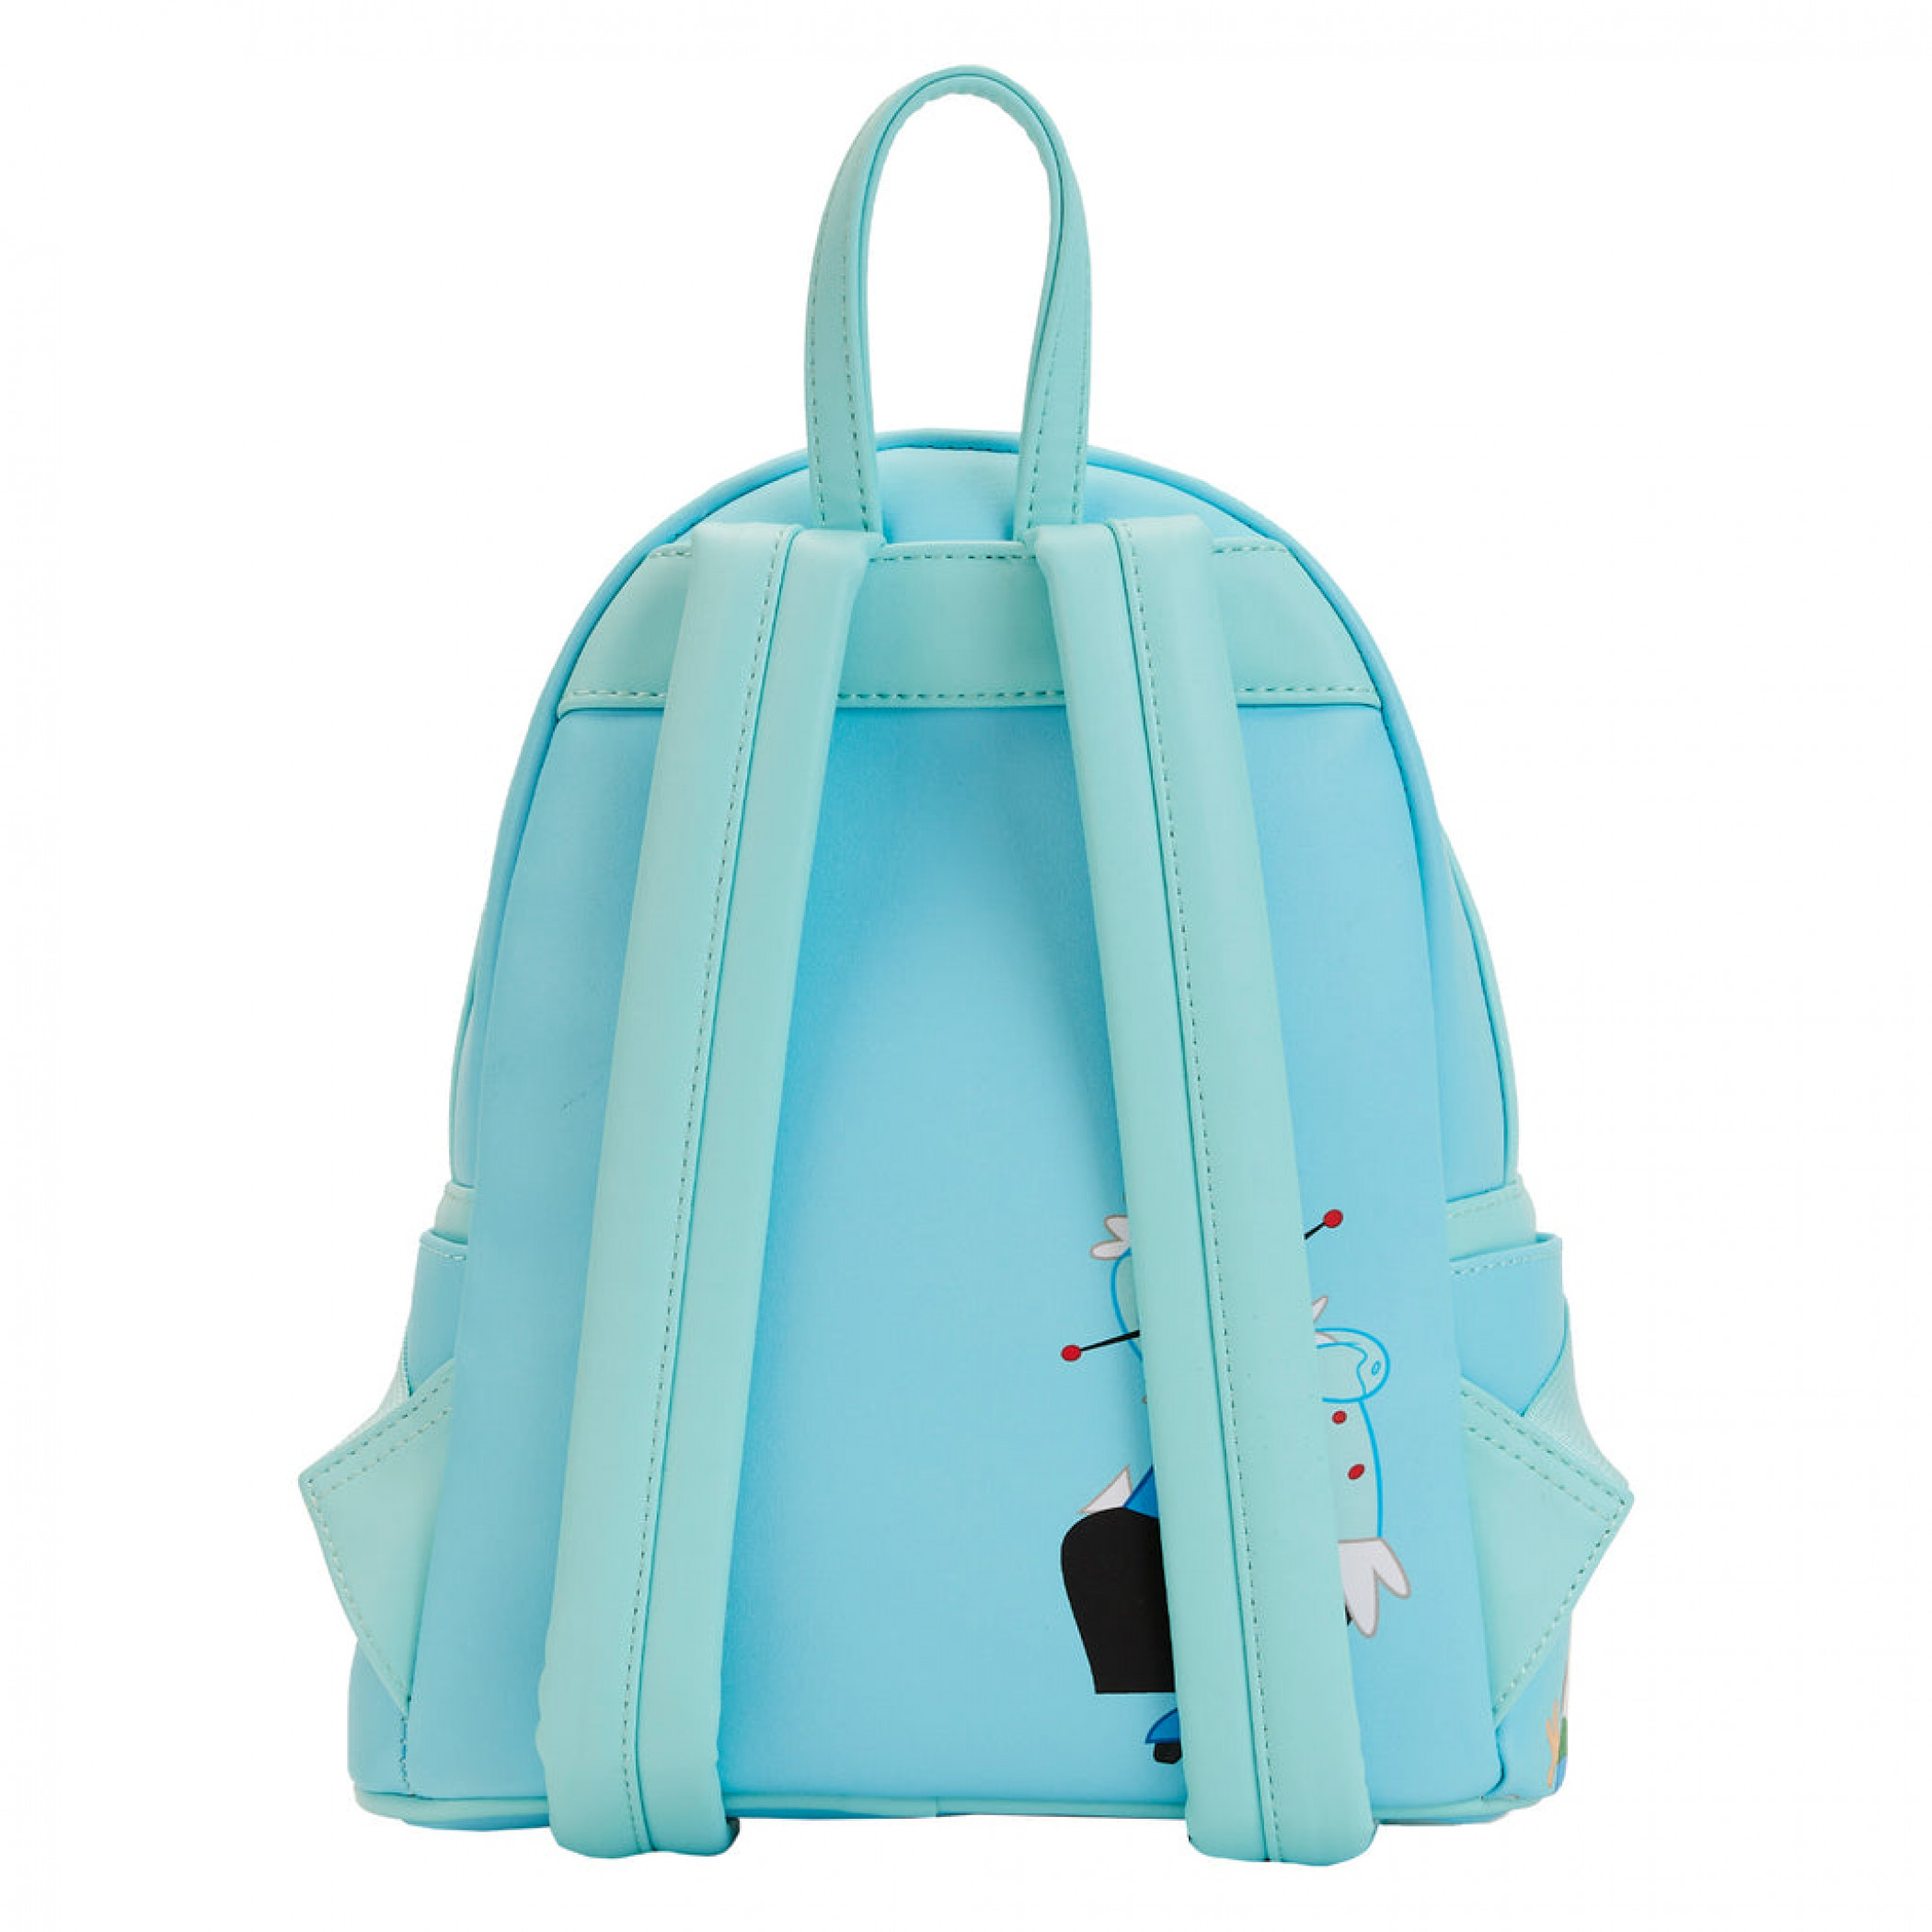 The Jetsons Spaceship Mini Backpack By Loungefly